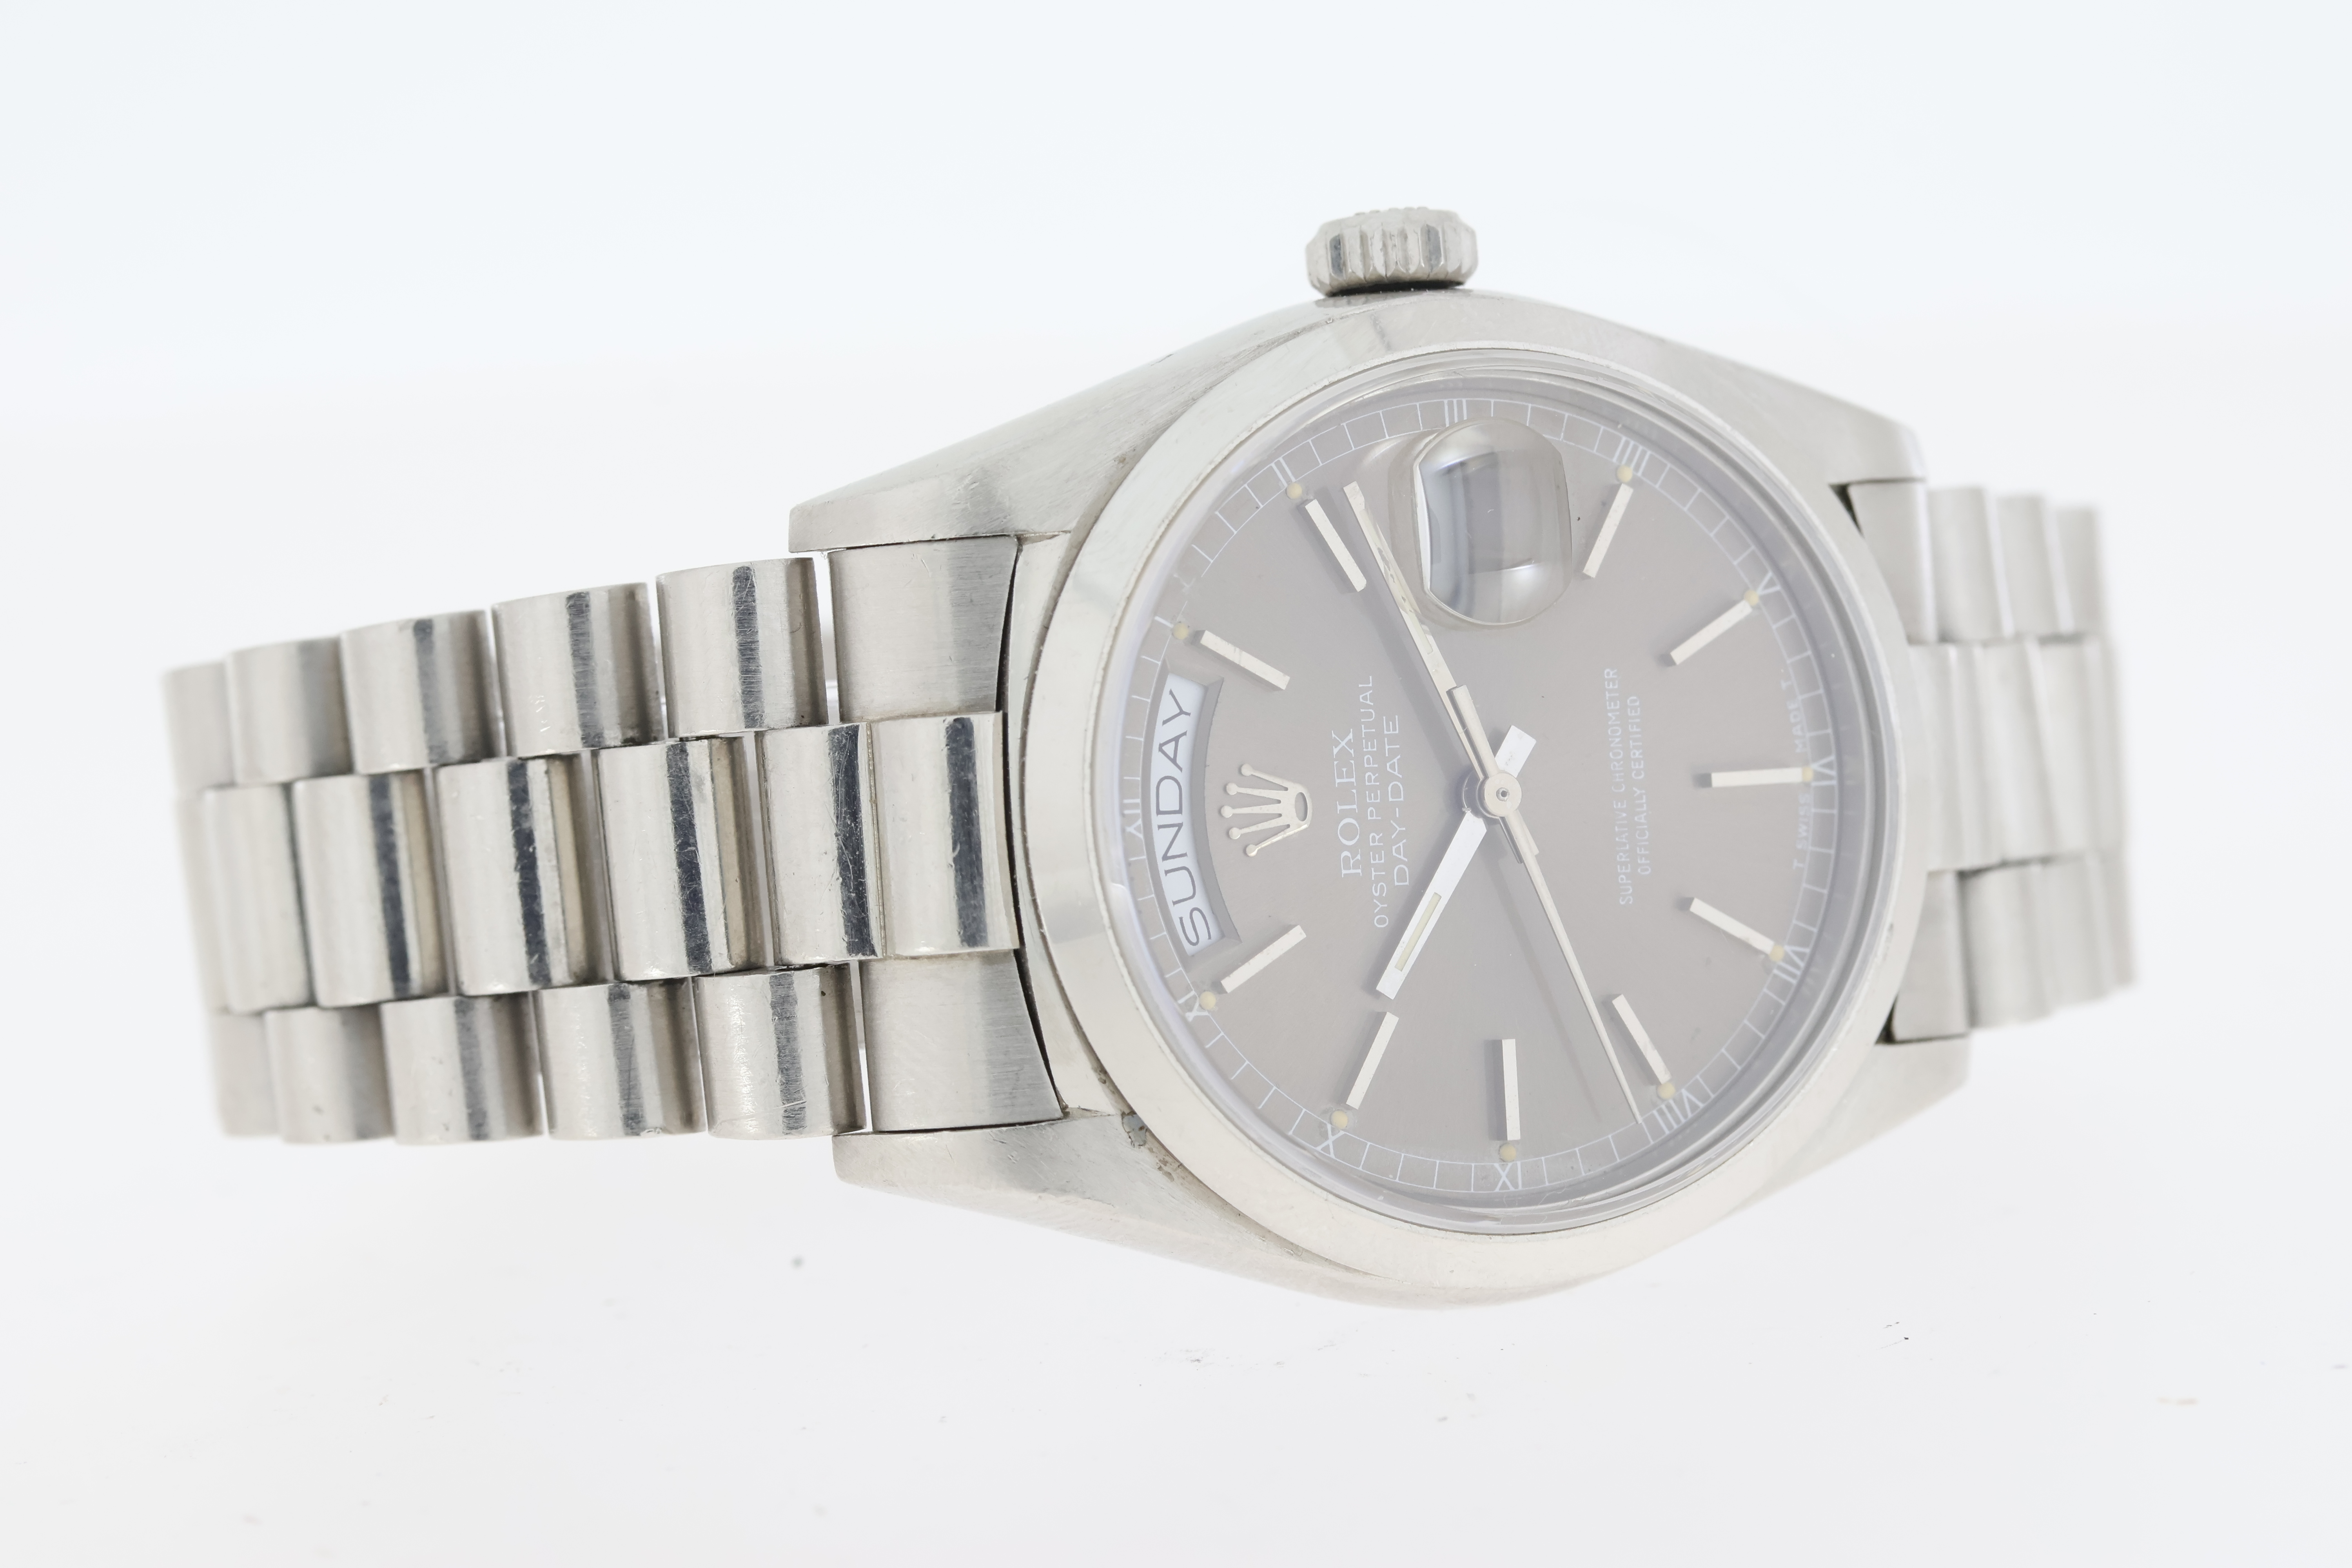 Platinum Rolex Day Date Reference 18026 with Box and Papers 1988 - Image 4 of 6